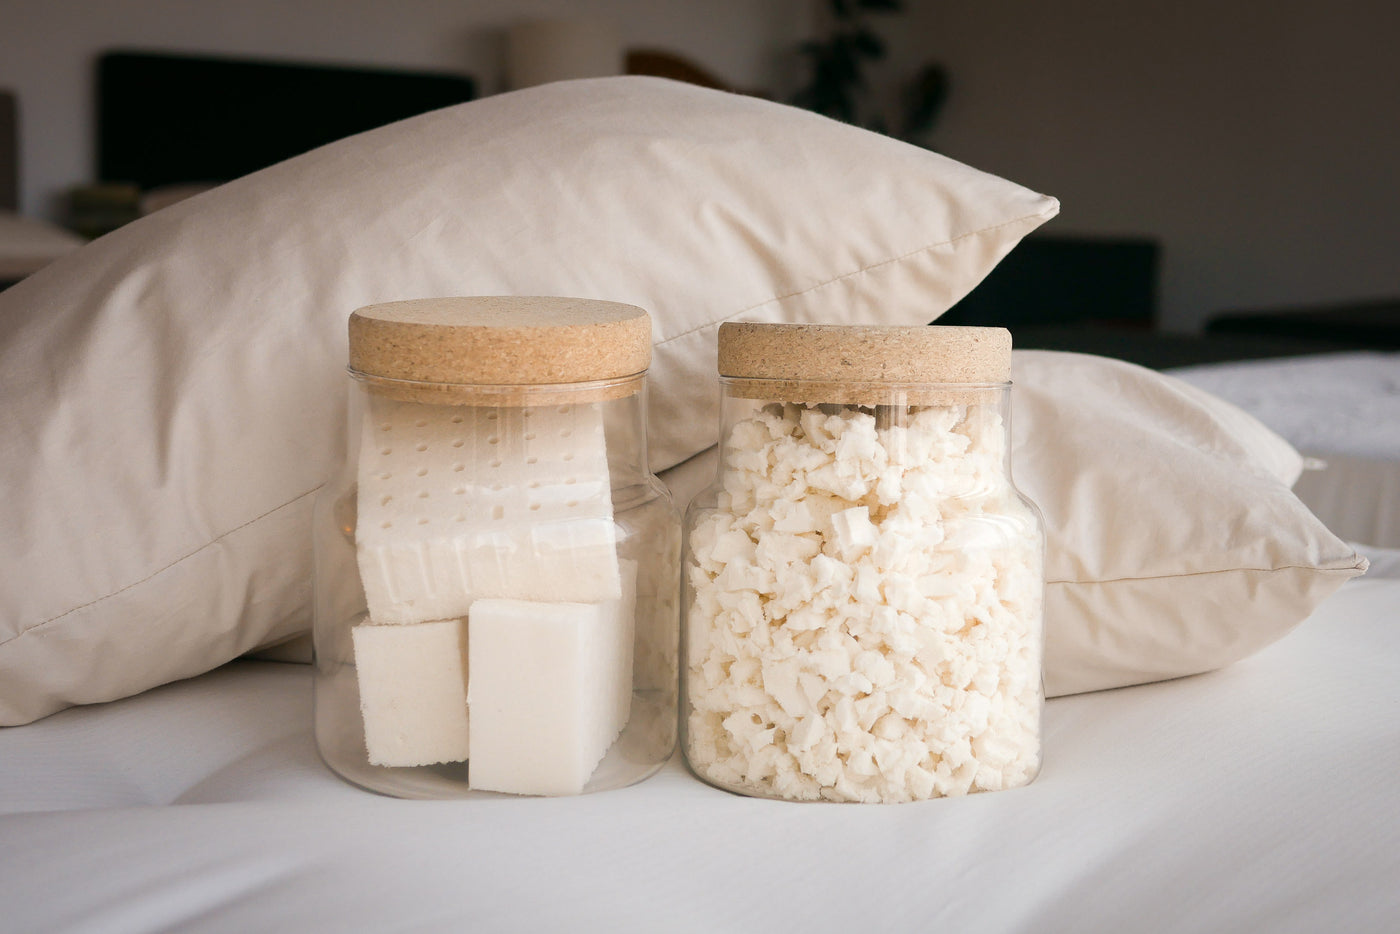 Jars of natural talalay latex and shredded natural talalay latex with two shredded natural latex pillows in the background